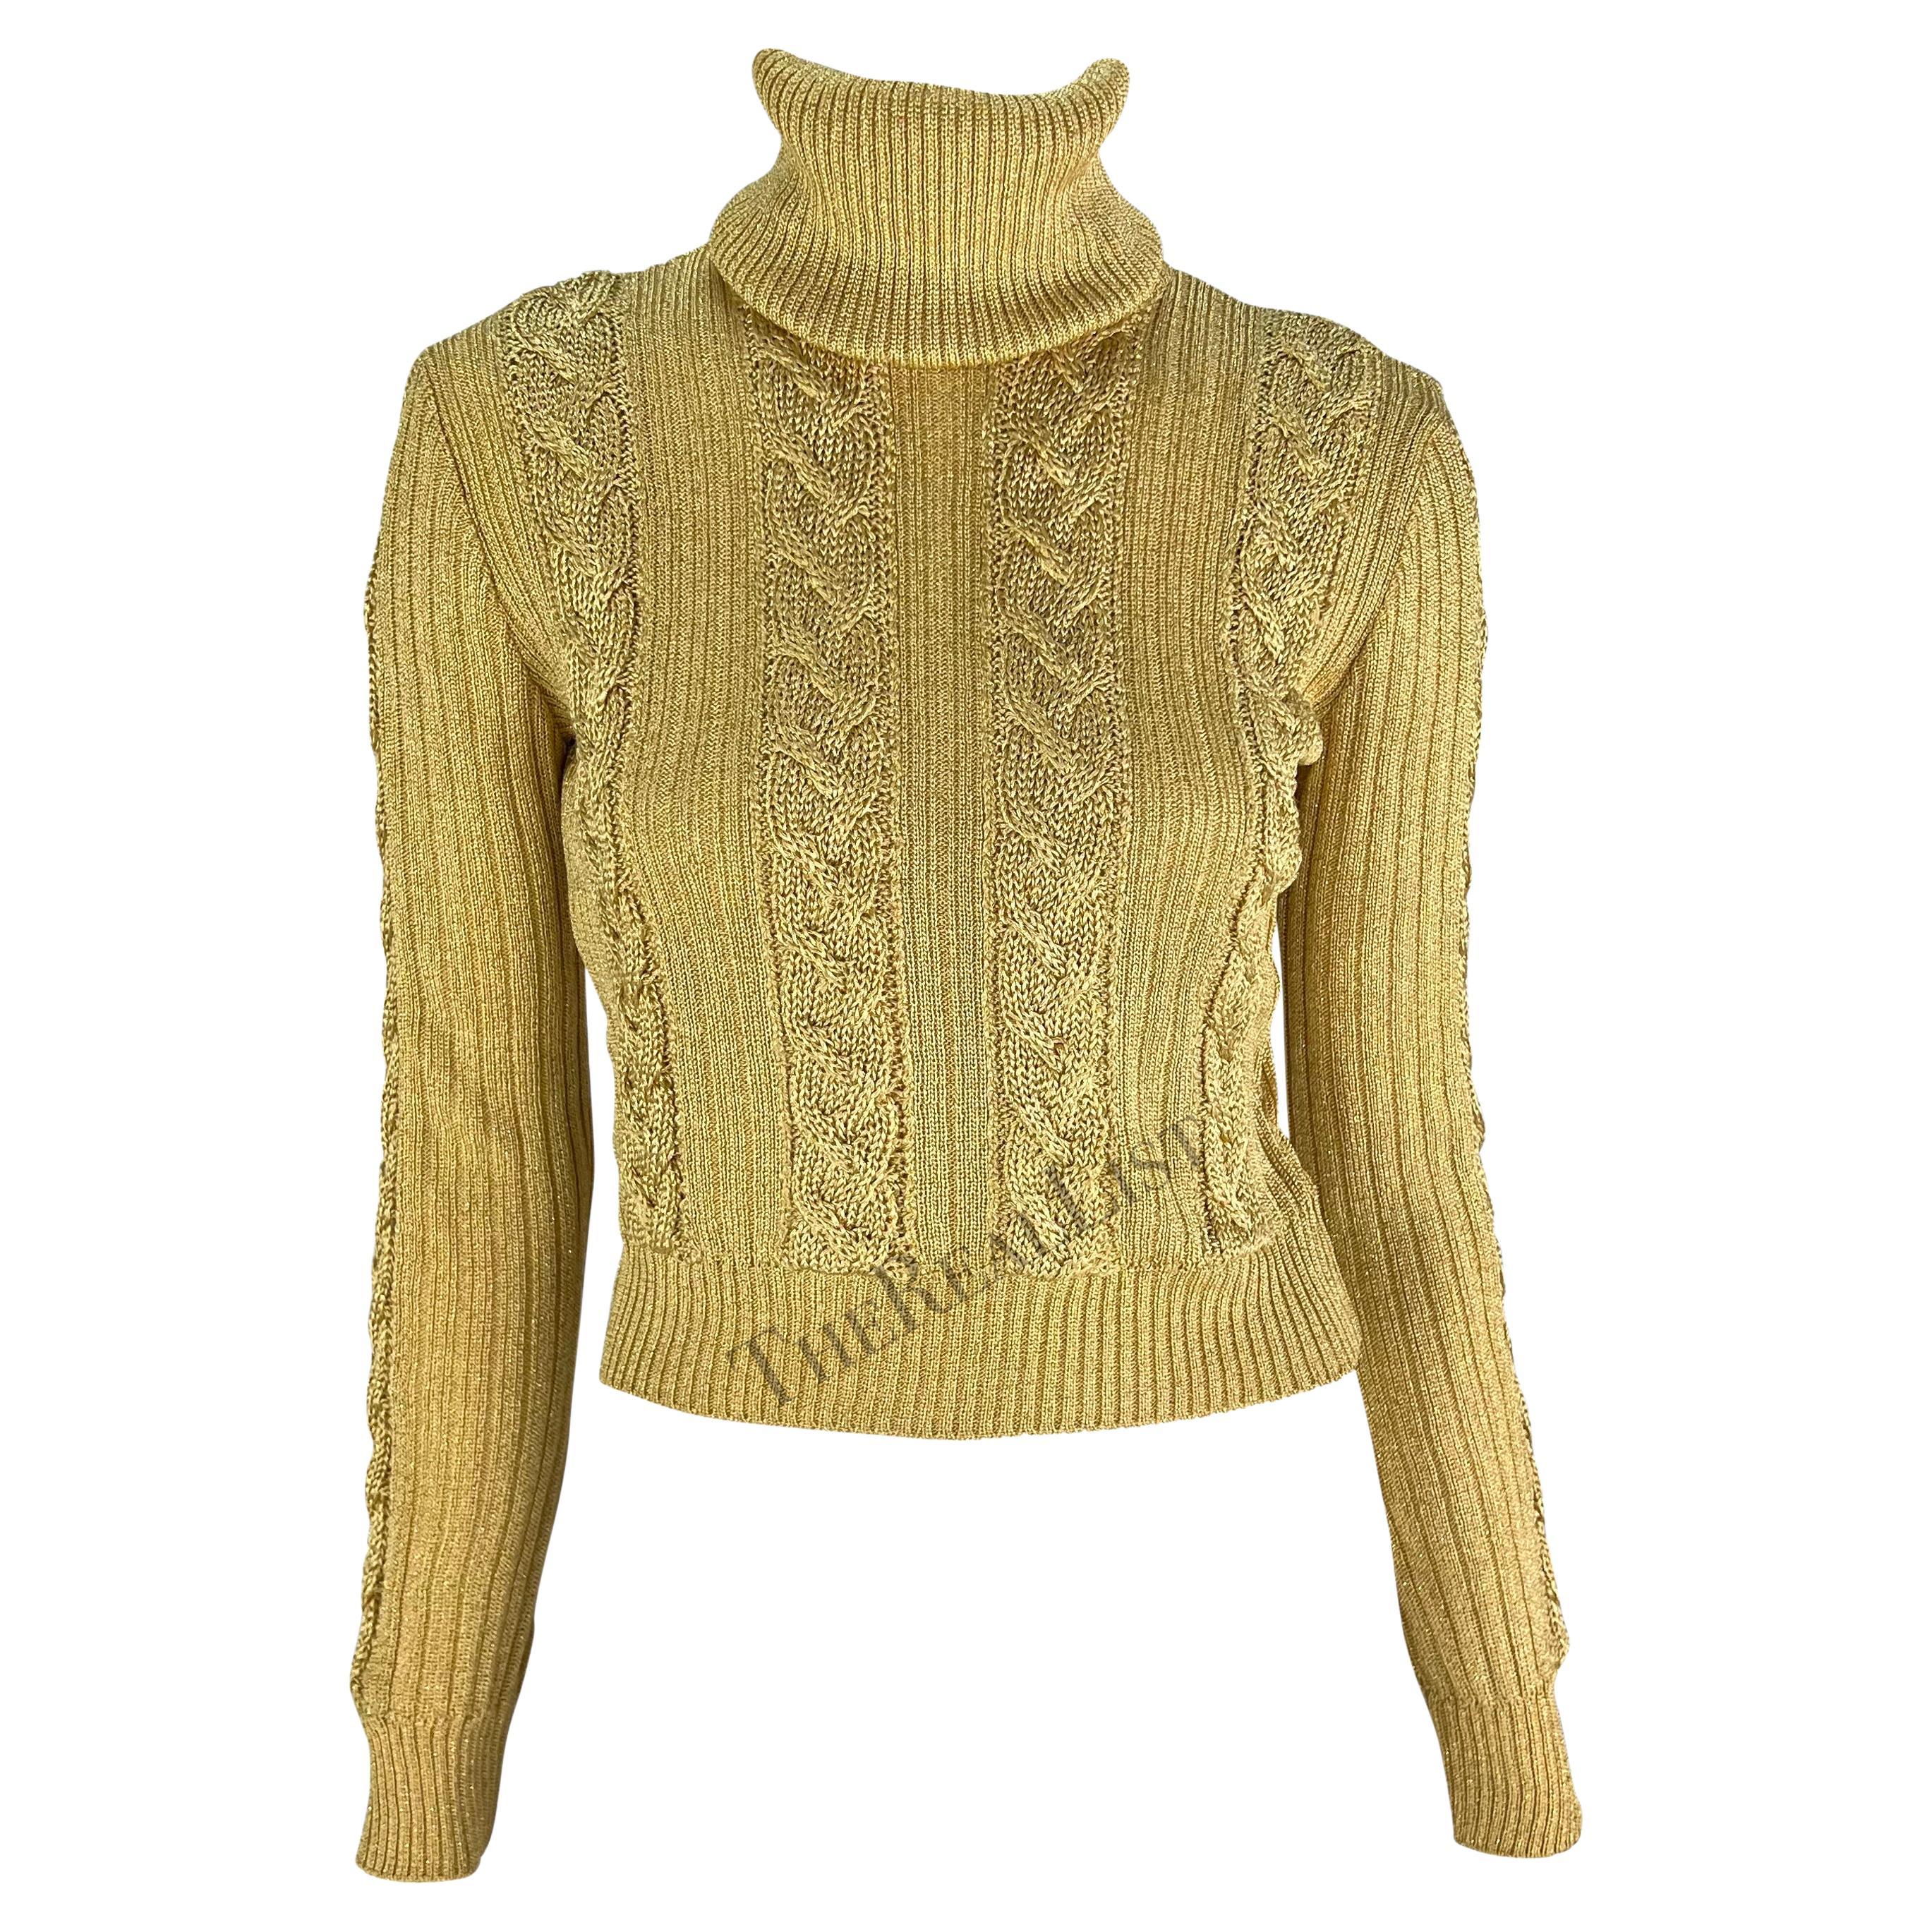 F/W 1994 Gianni Versace Ad Runway Gold Metallic Cable Knit Turtleneck Sweater For Sale